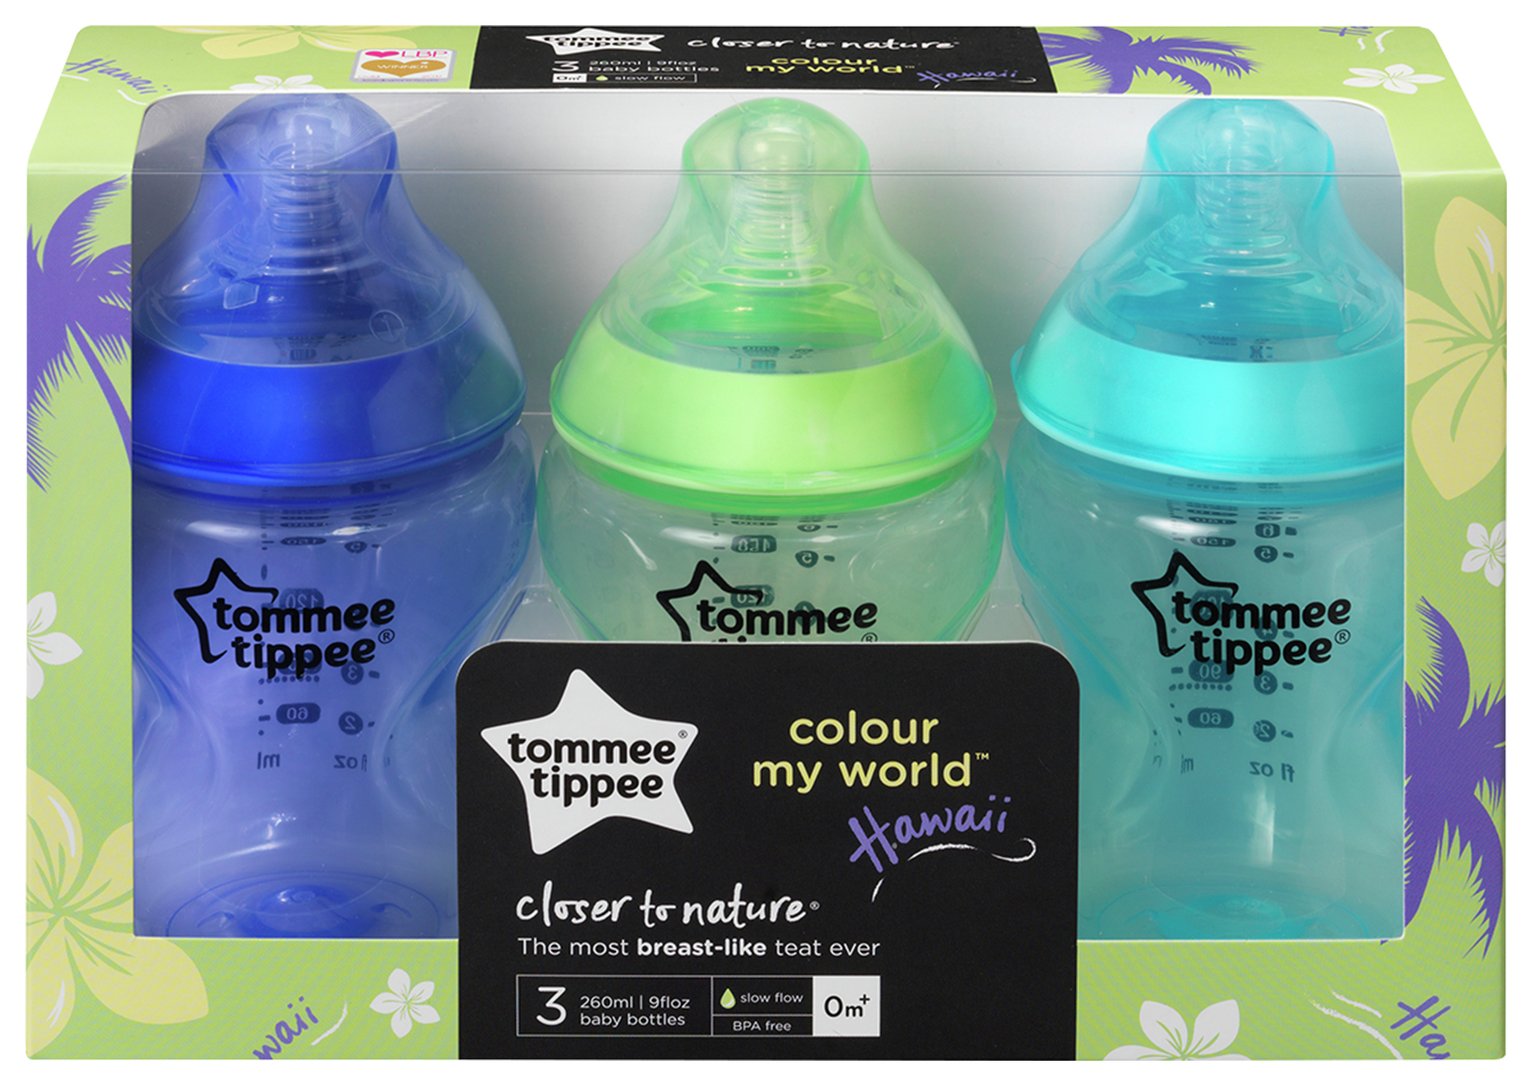 Tommee Tippee Closer to Nature Coloured Bottles Review